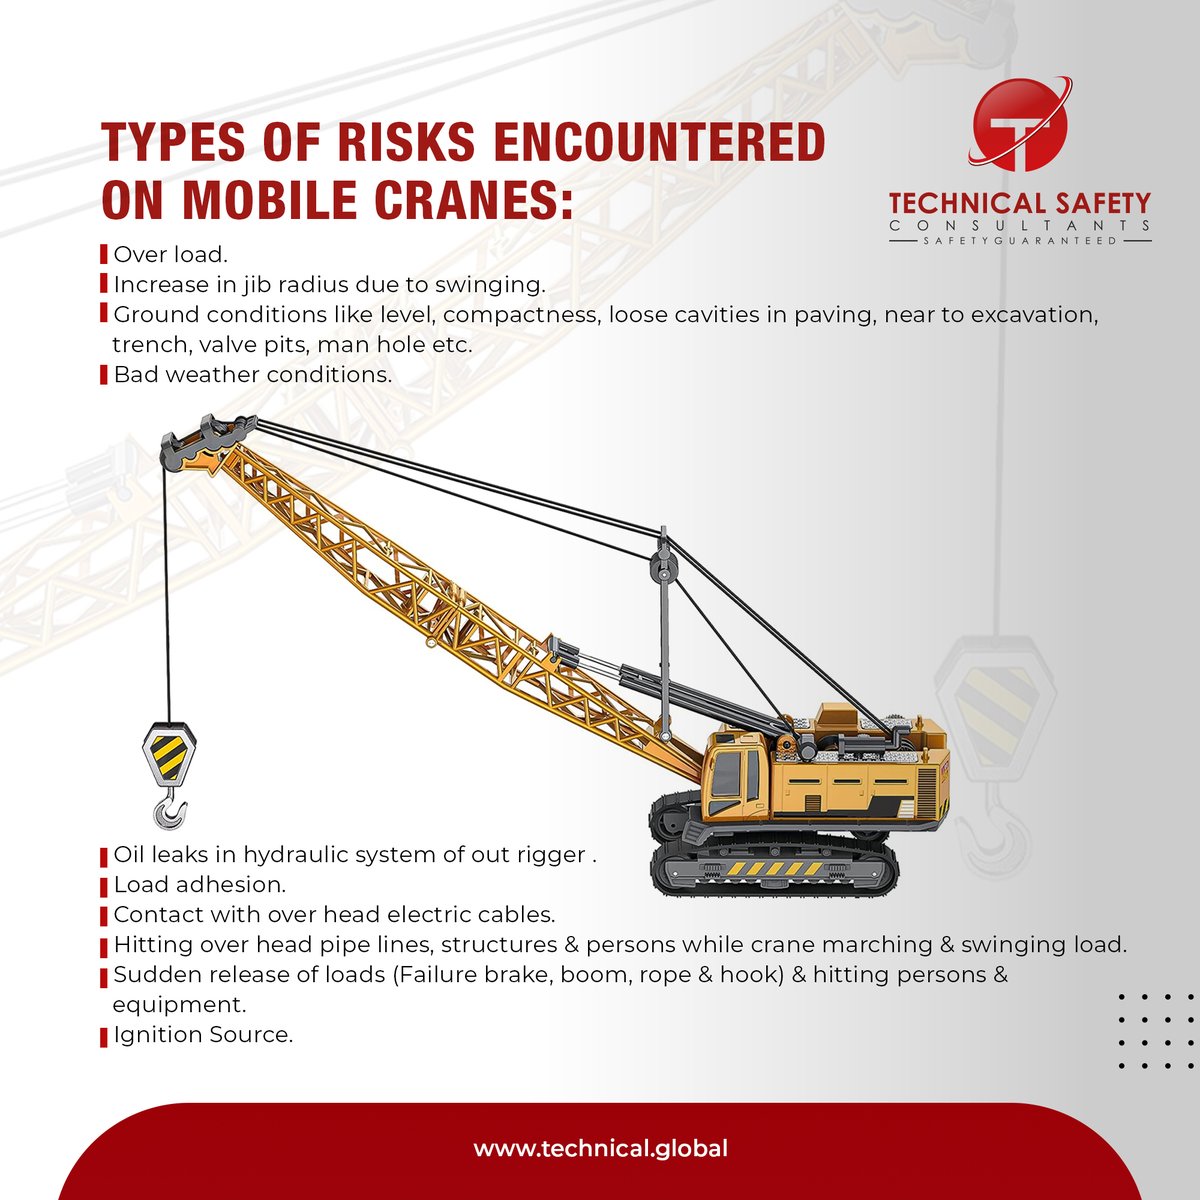 Always lift loading gently & operate crane motions smoothly to avoid load swinging. Use steady lines where necessary & where the load presents a wind-catching area

#technicalsafetyconsultants #ppe #mobilecrane #technicalsupport #technicalservices #safety #construction #corrosion